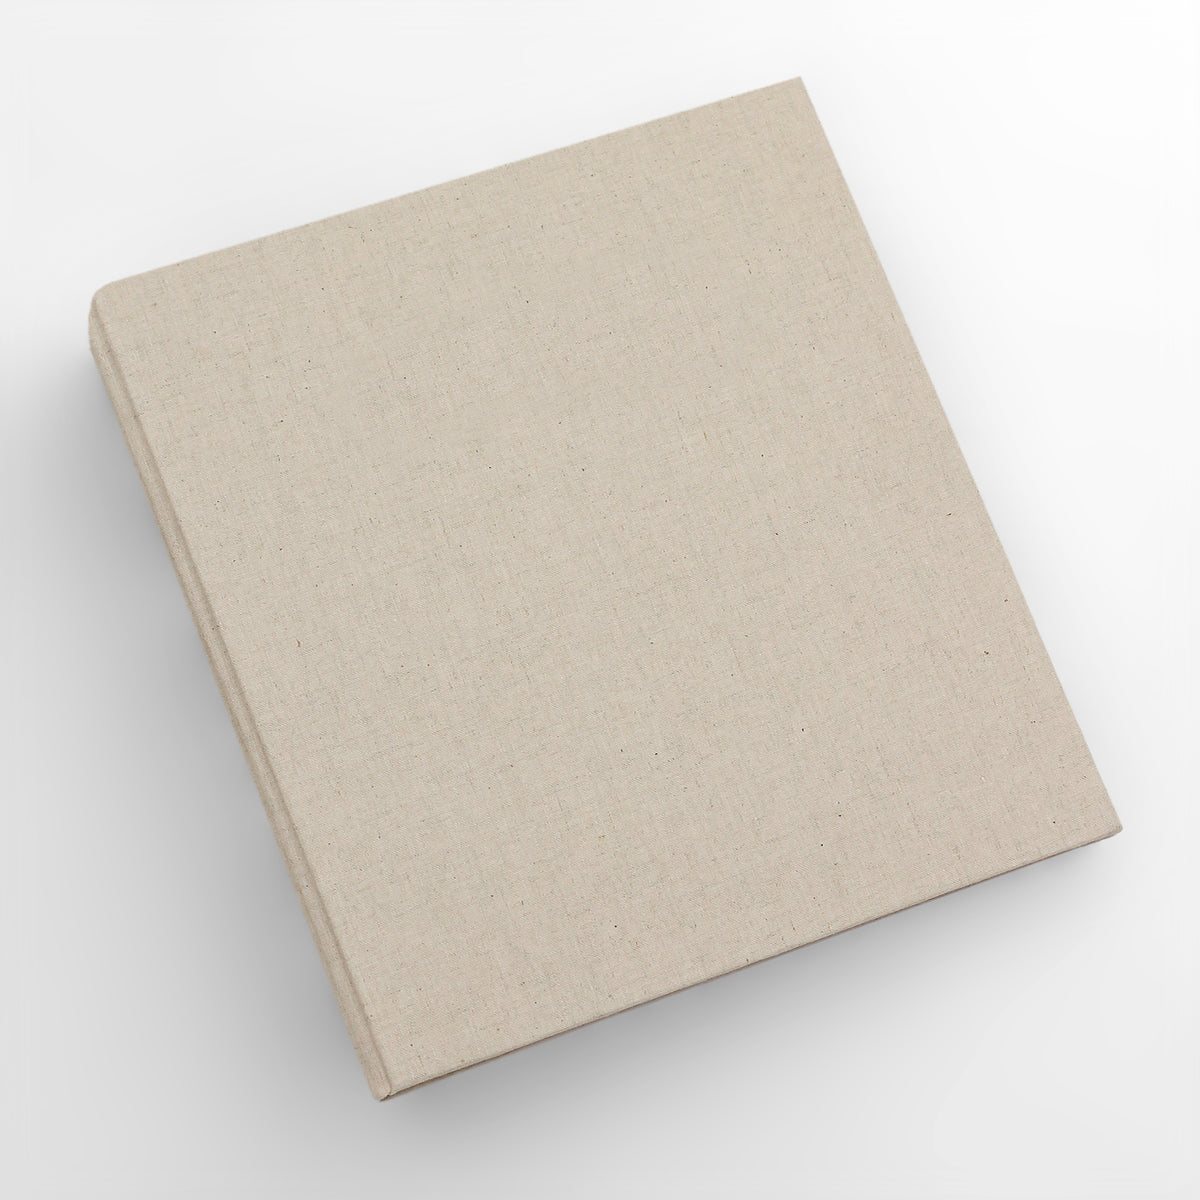 Storage Binder for Photos or Documents with Natural Linen Cover